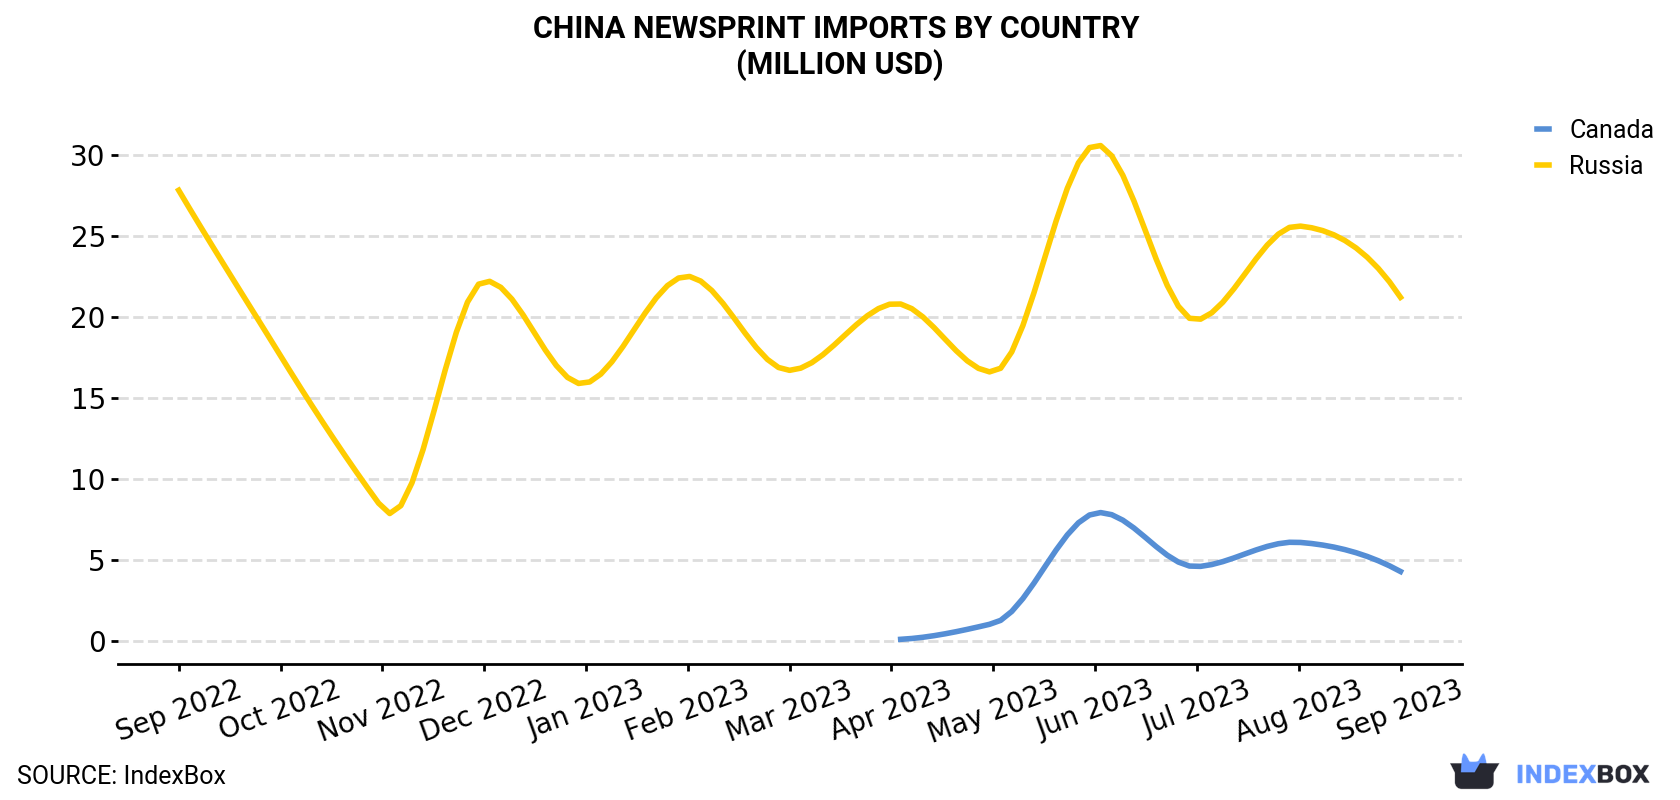 China Newsprint Imports By Country (Million USD)